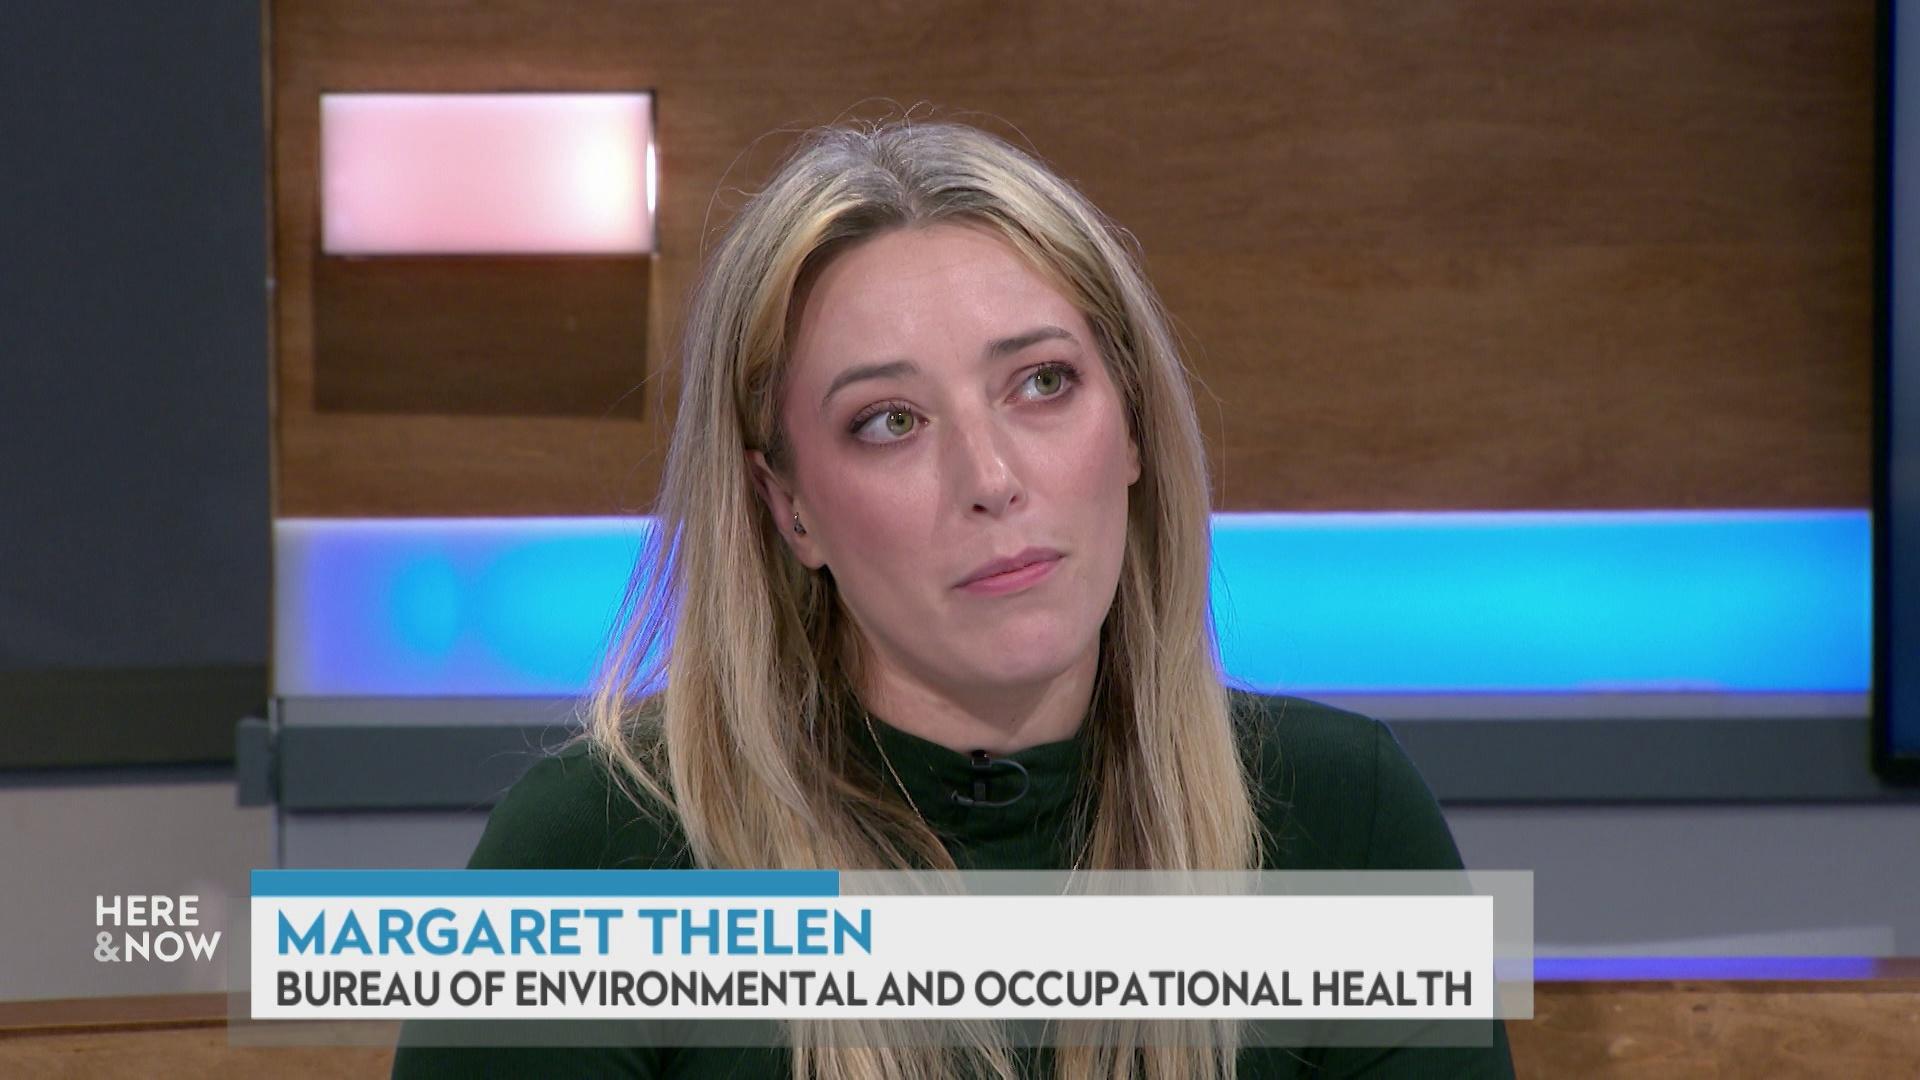 A still image shows Margaret Thelen seated at the 'Here & Now' set featuring wood paneling, with a graphic at bottom reading 'Margaret Thelen' and 'Bureau of Environmental and Occupational Health.'